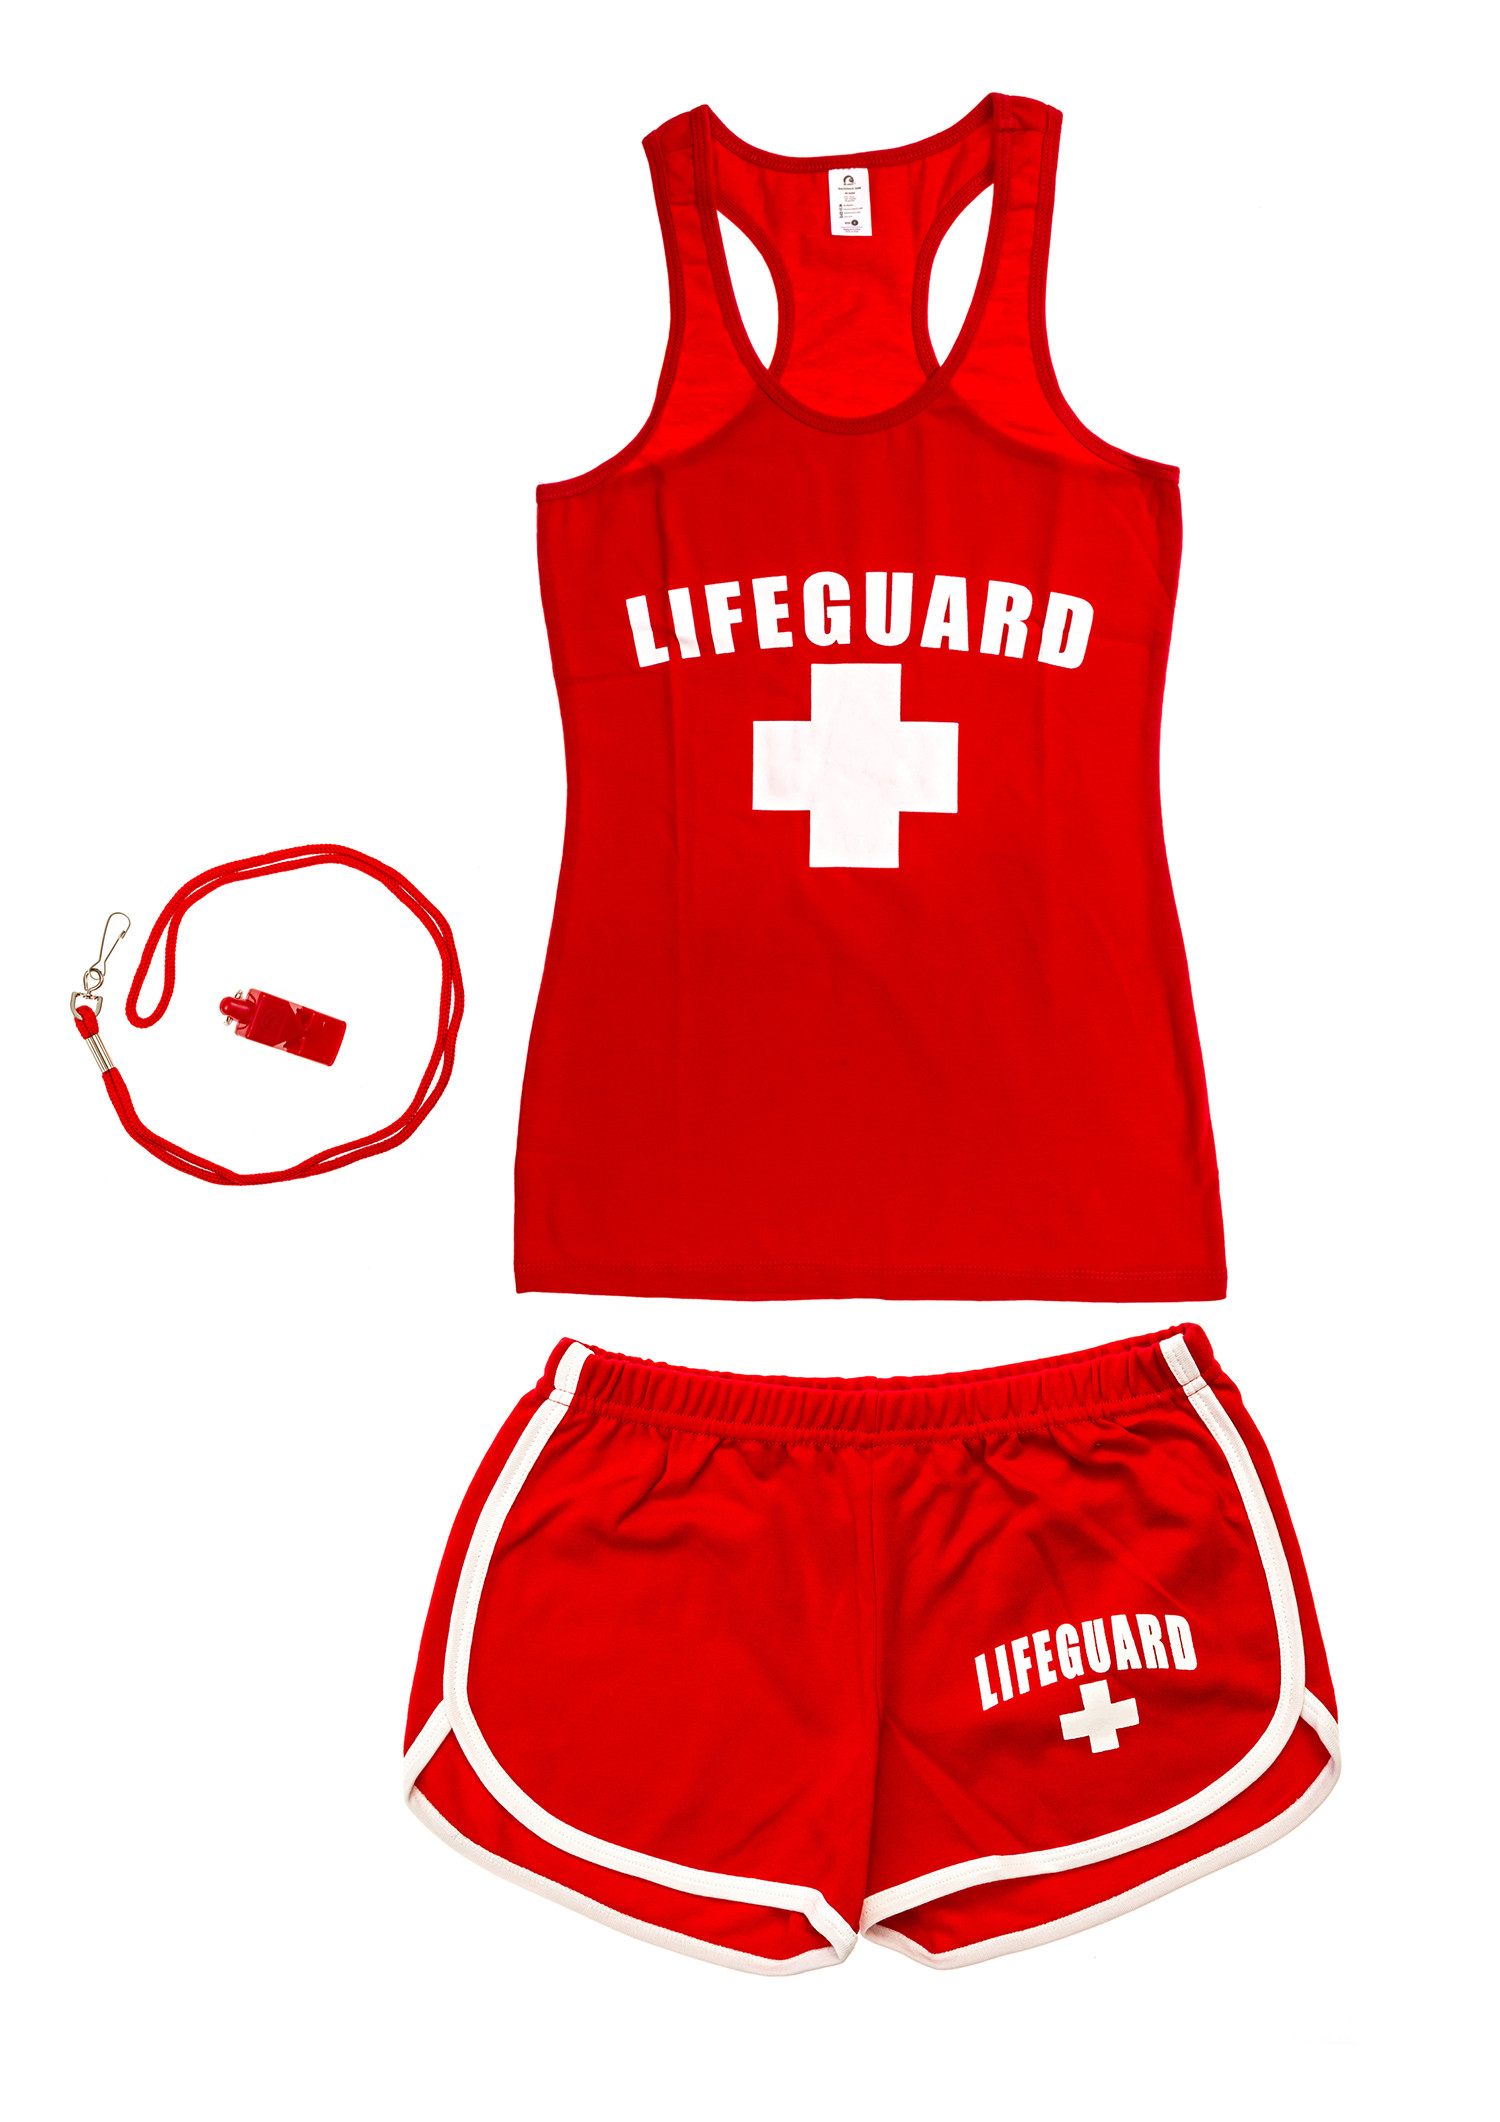 The 35 Best Ideas for Diy Lifeguard Costume - Home, Family, Style and Art Ideas